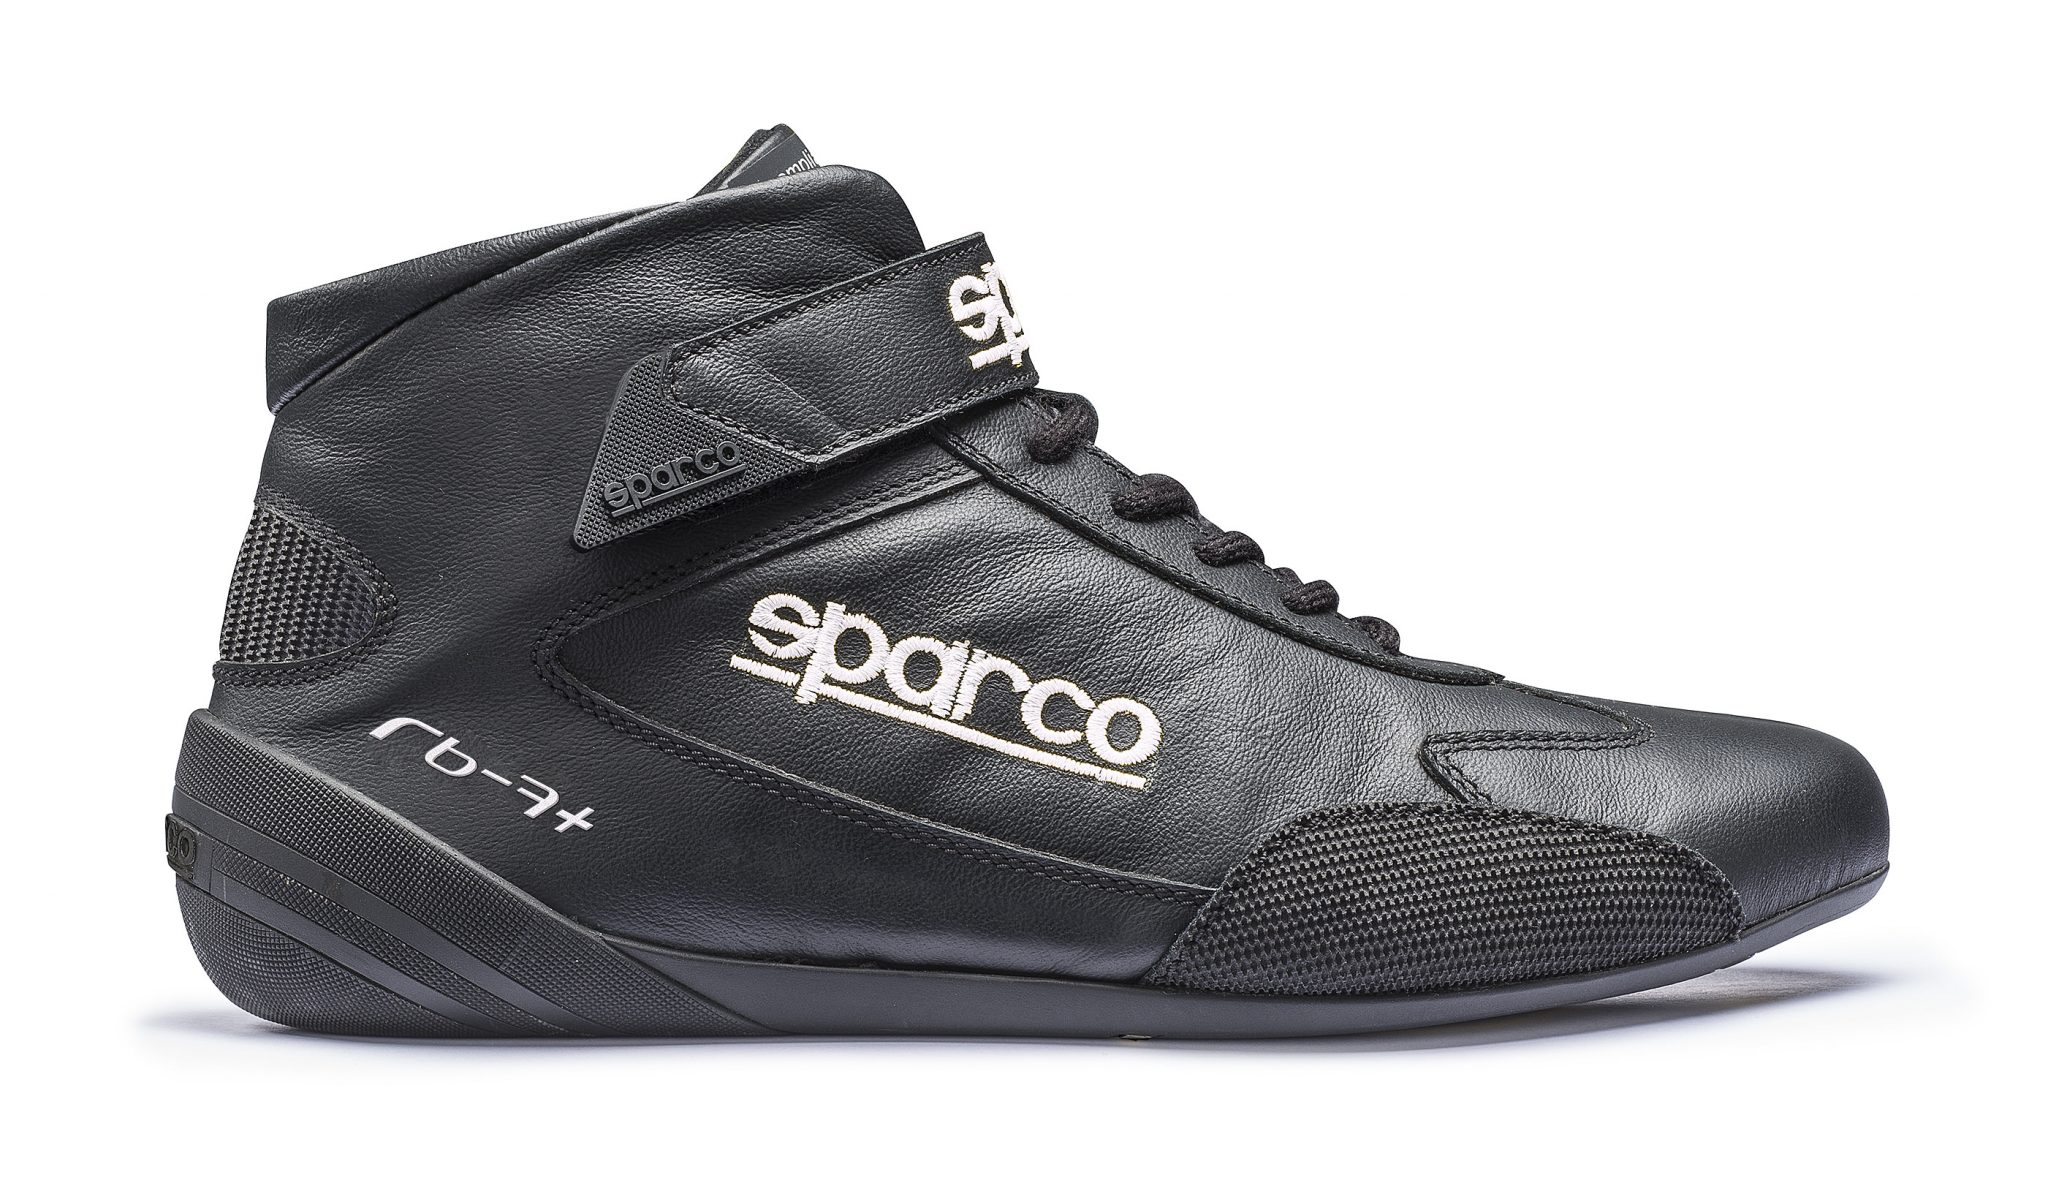 SPARCO CROSS RB-7 FIA 8856-2000 SHOES RACING BOOTS SCHUHE 